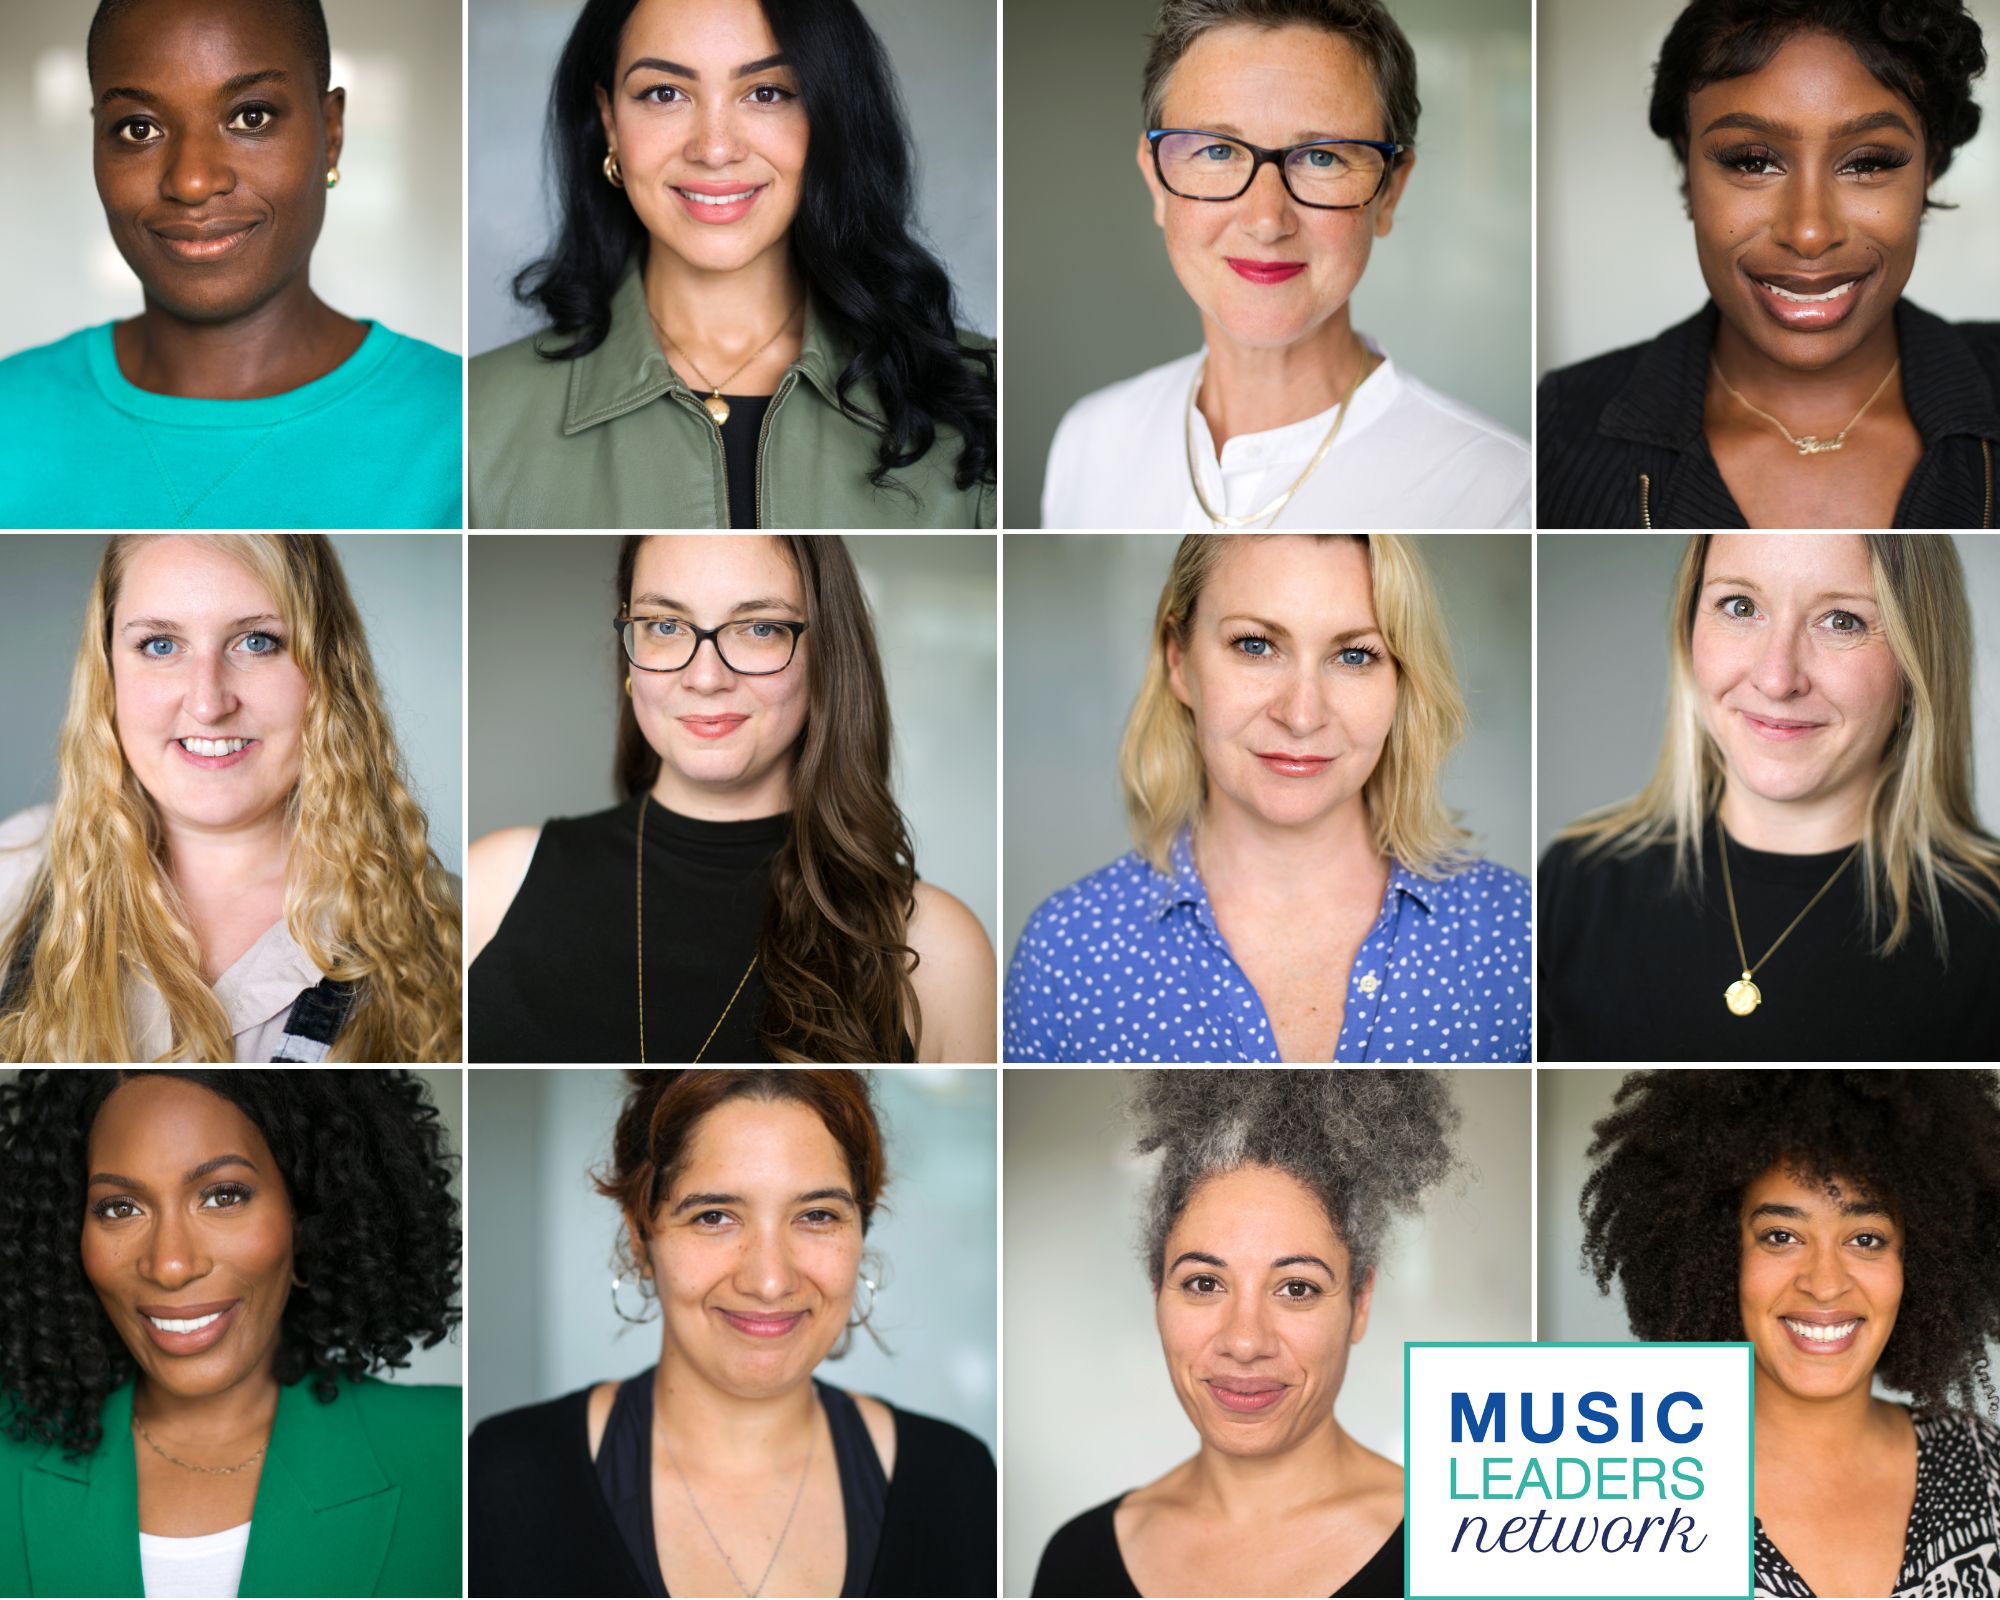 A gallery showing the faces of 12 female leaders who are part of the Music Leaders Network programme in 2022